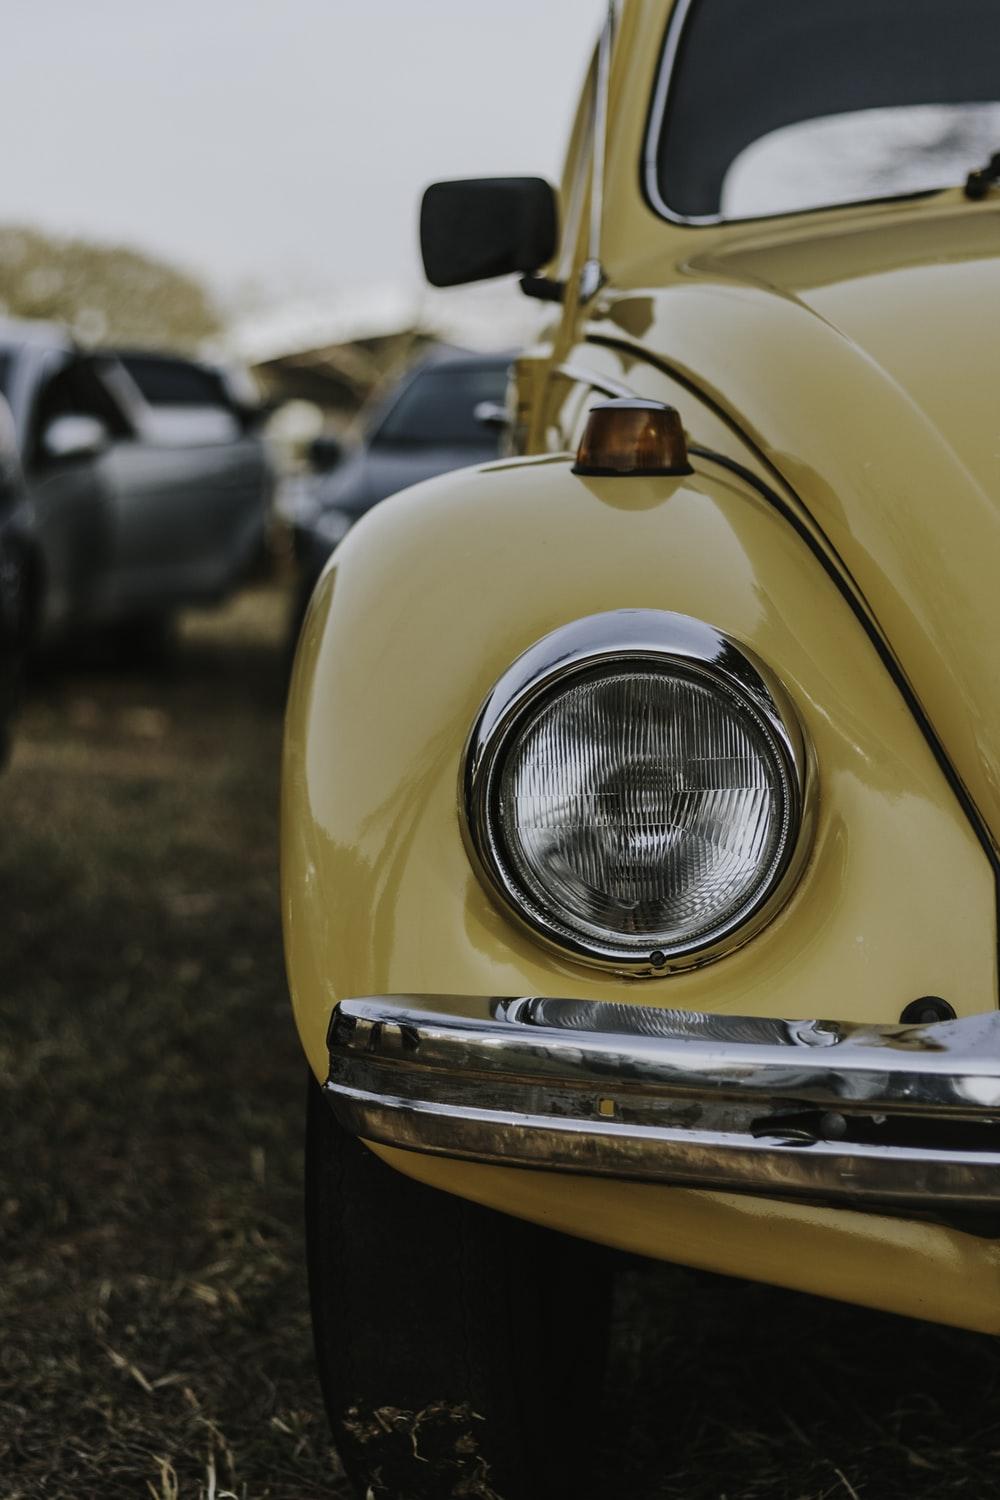 Vw Beetle Picture. Download Free Image